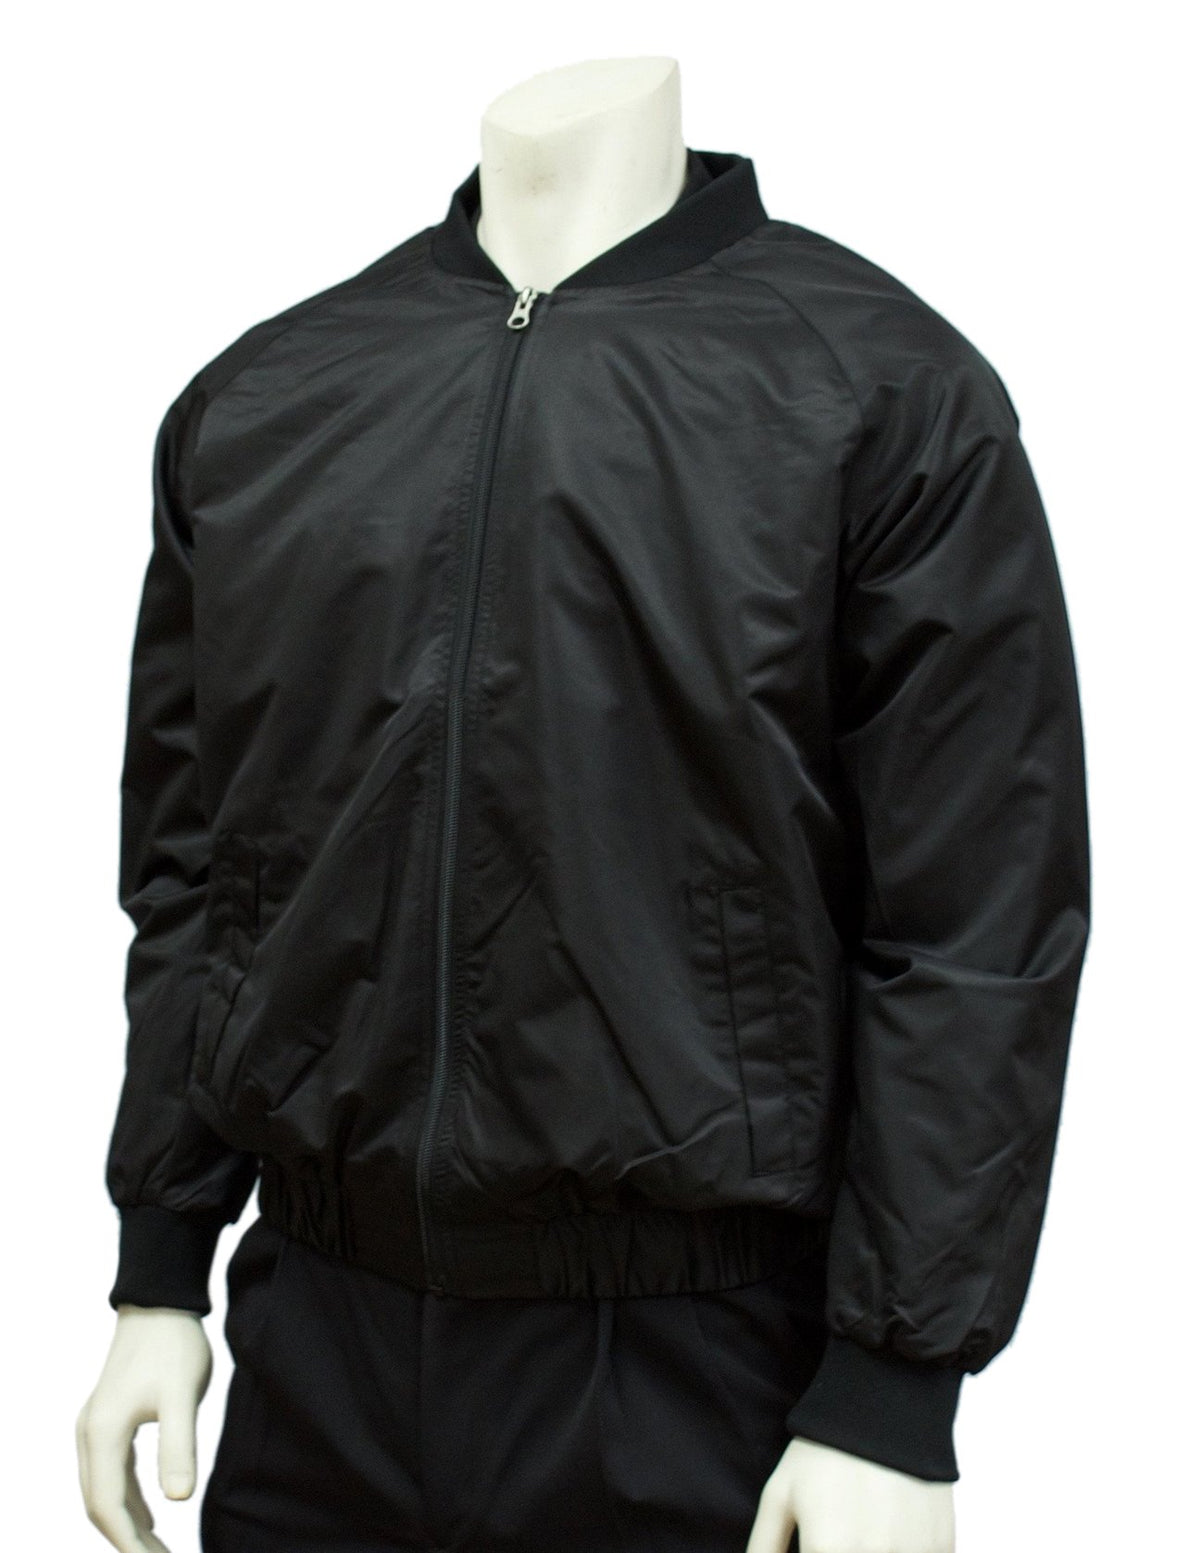 Smitty | BKS-220 | Black Official's Jacket